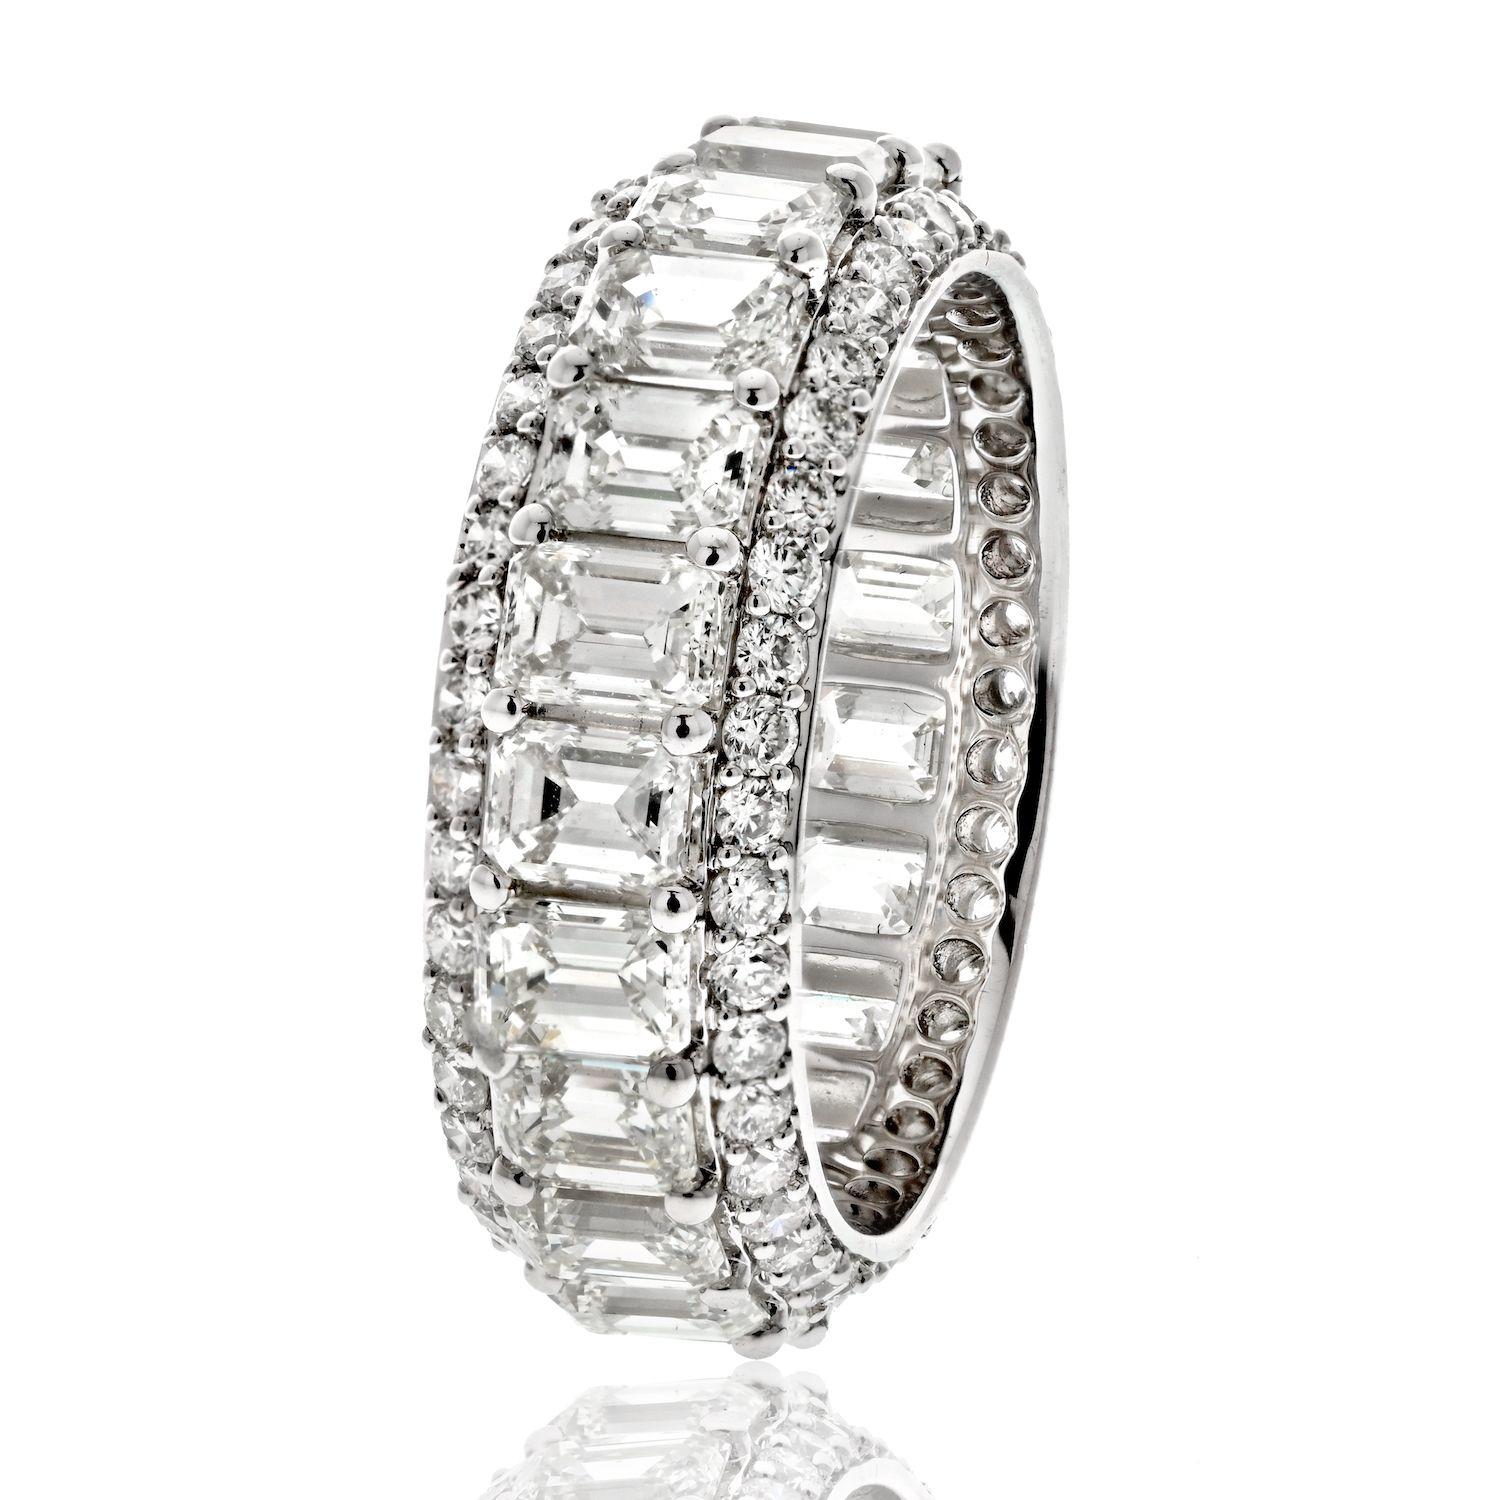 Newly made this classic emerald cut and round cut diamond eternity band is an excellent choice if you are shopping for an exciting wedding band or an anniversary ring. Crafted in 14k white gold with clean white emerald cut diamonds and full cut